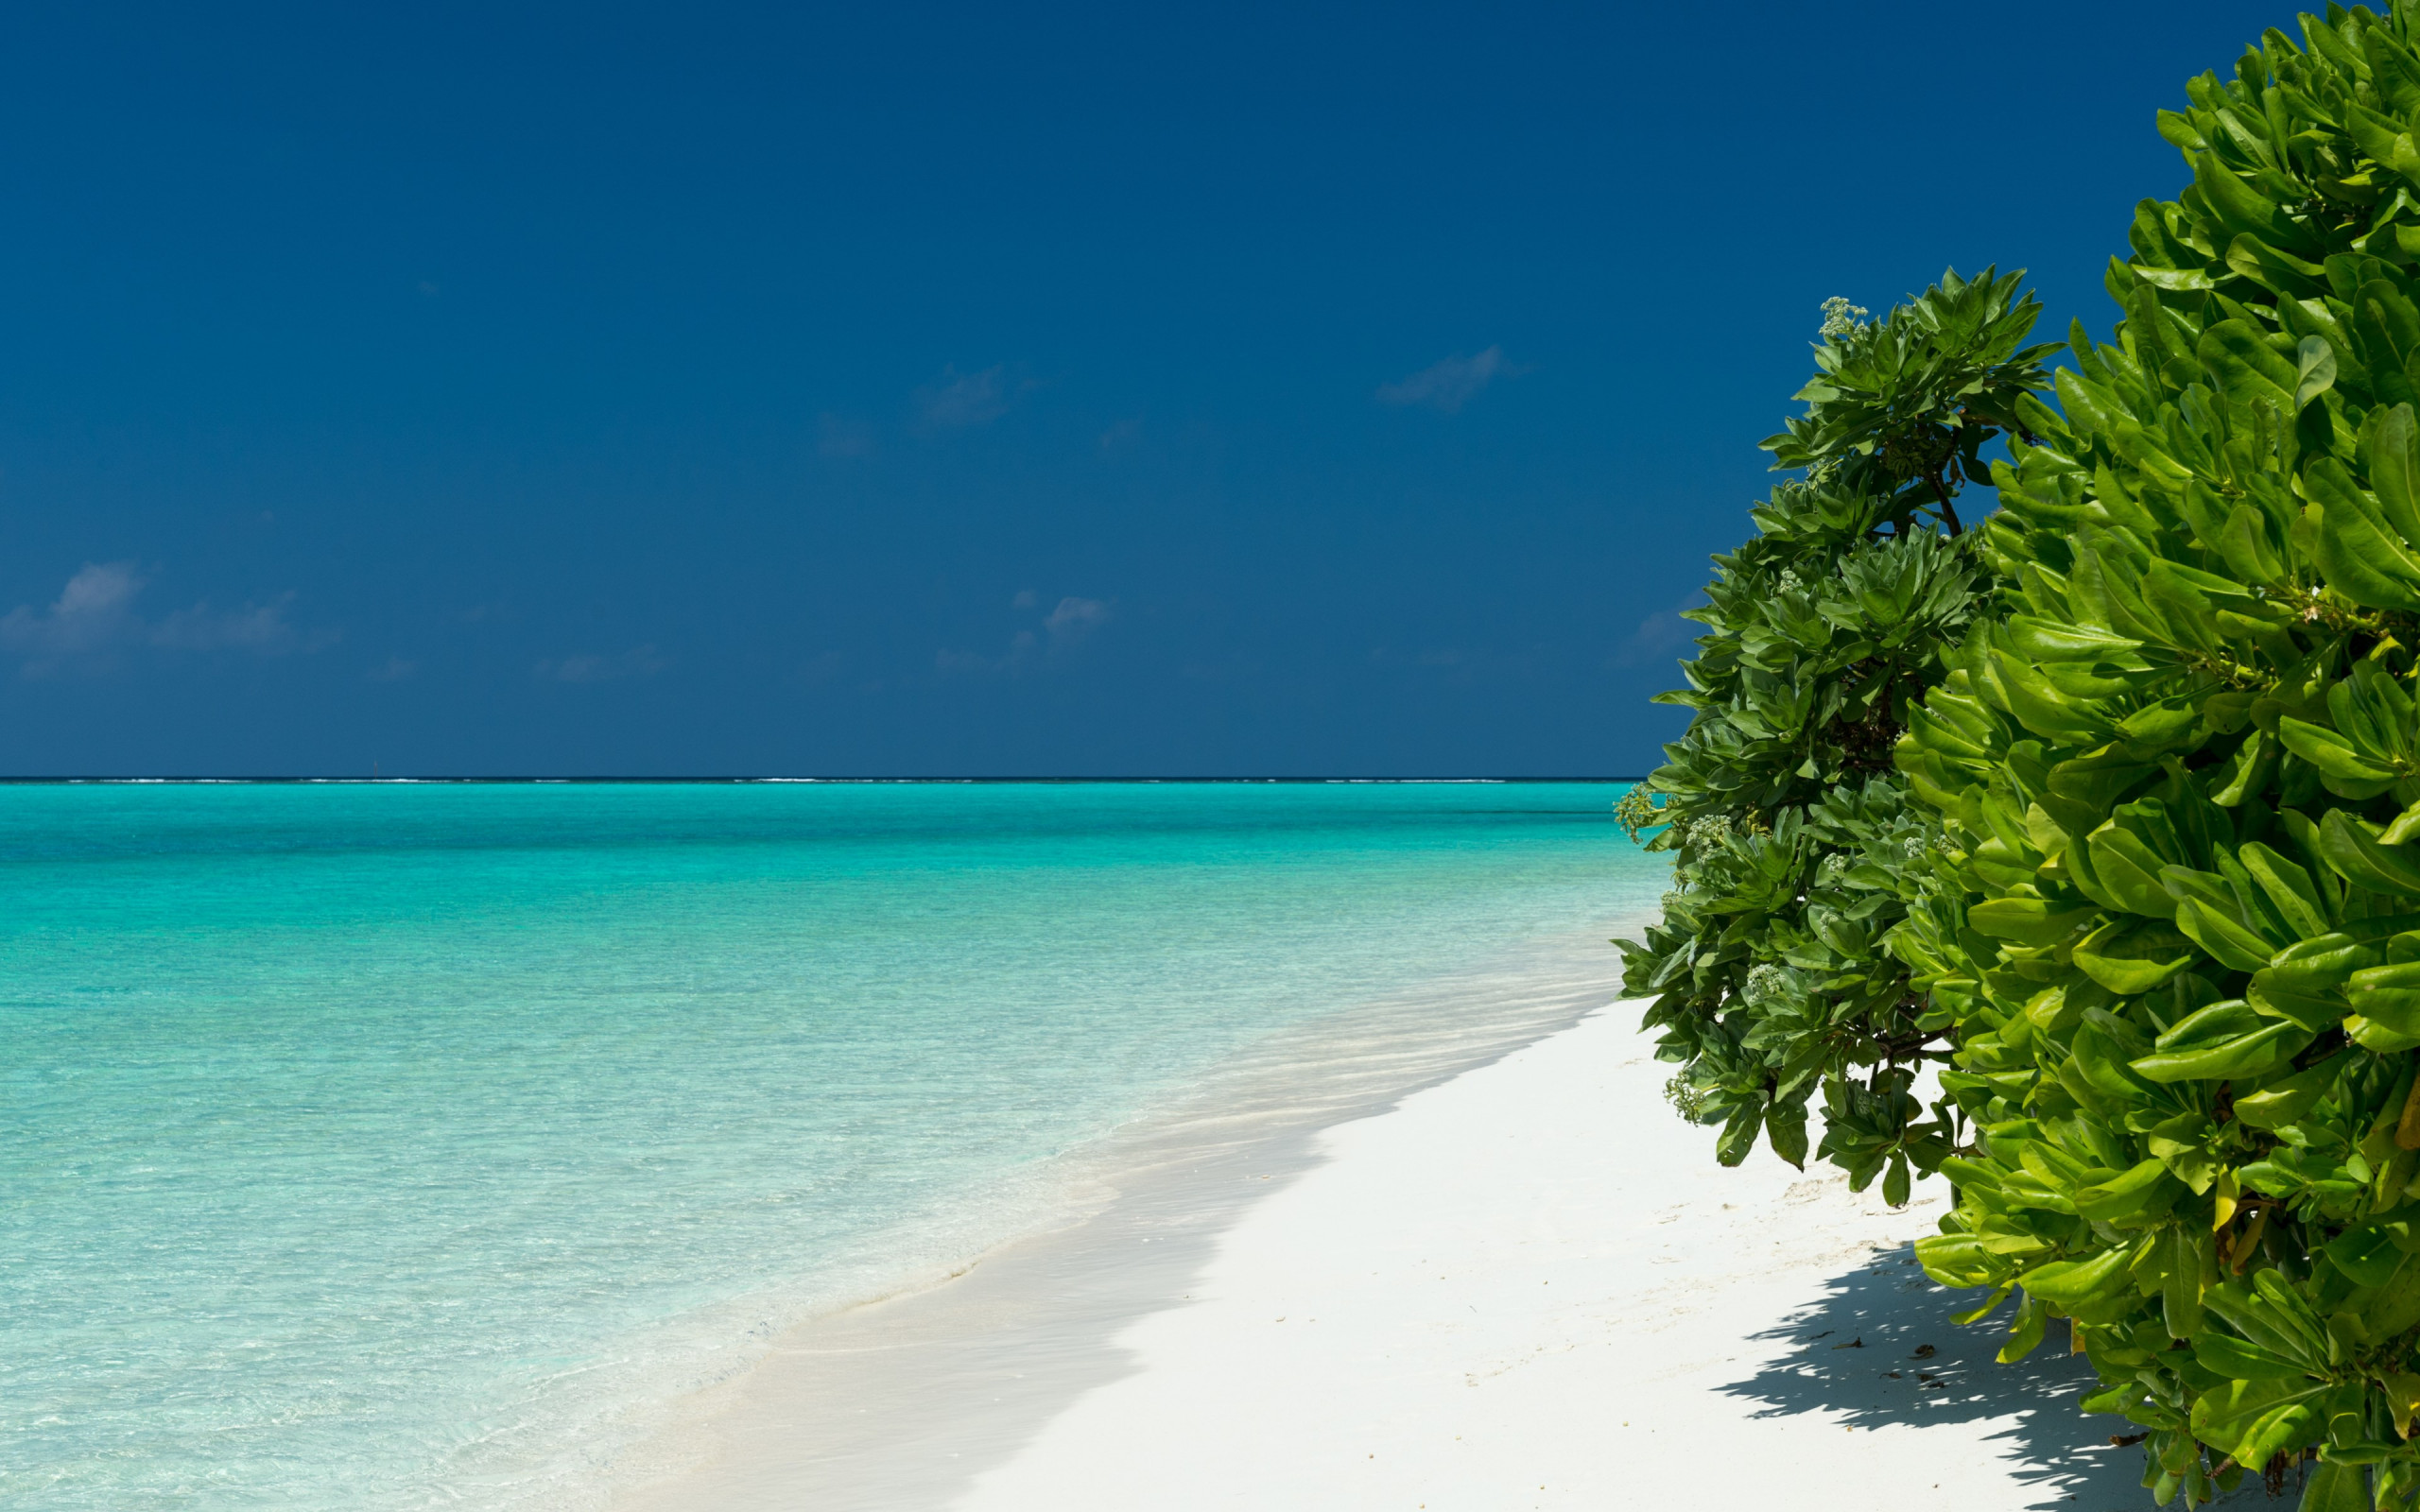 Turquoise waters of Maldives wallpaper 2560x1600